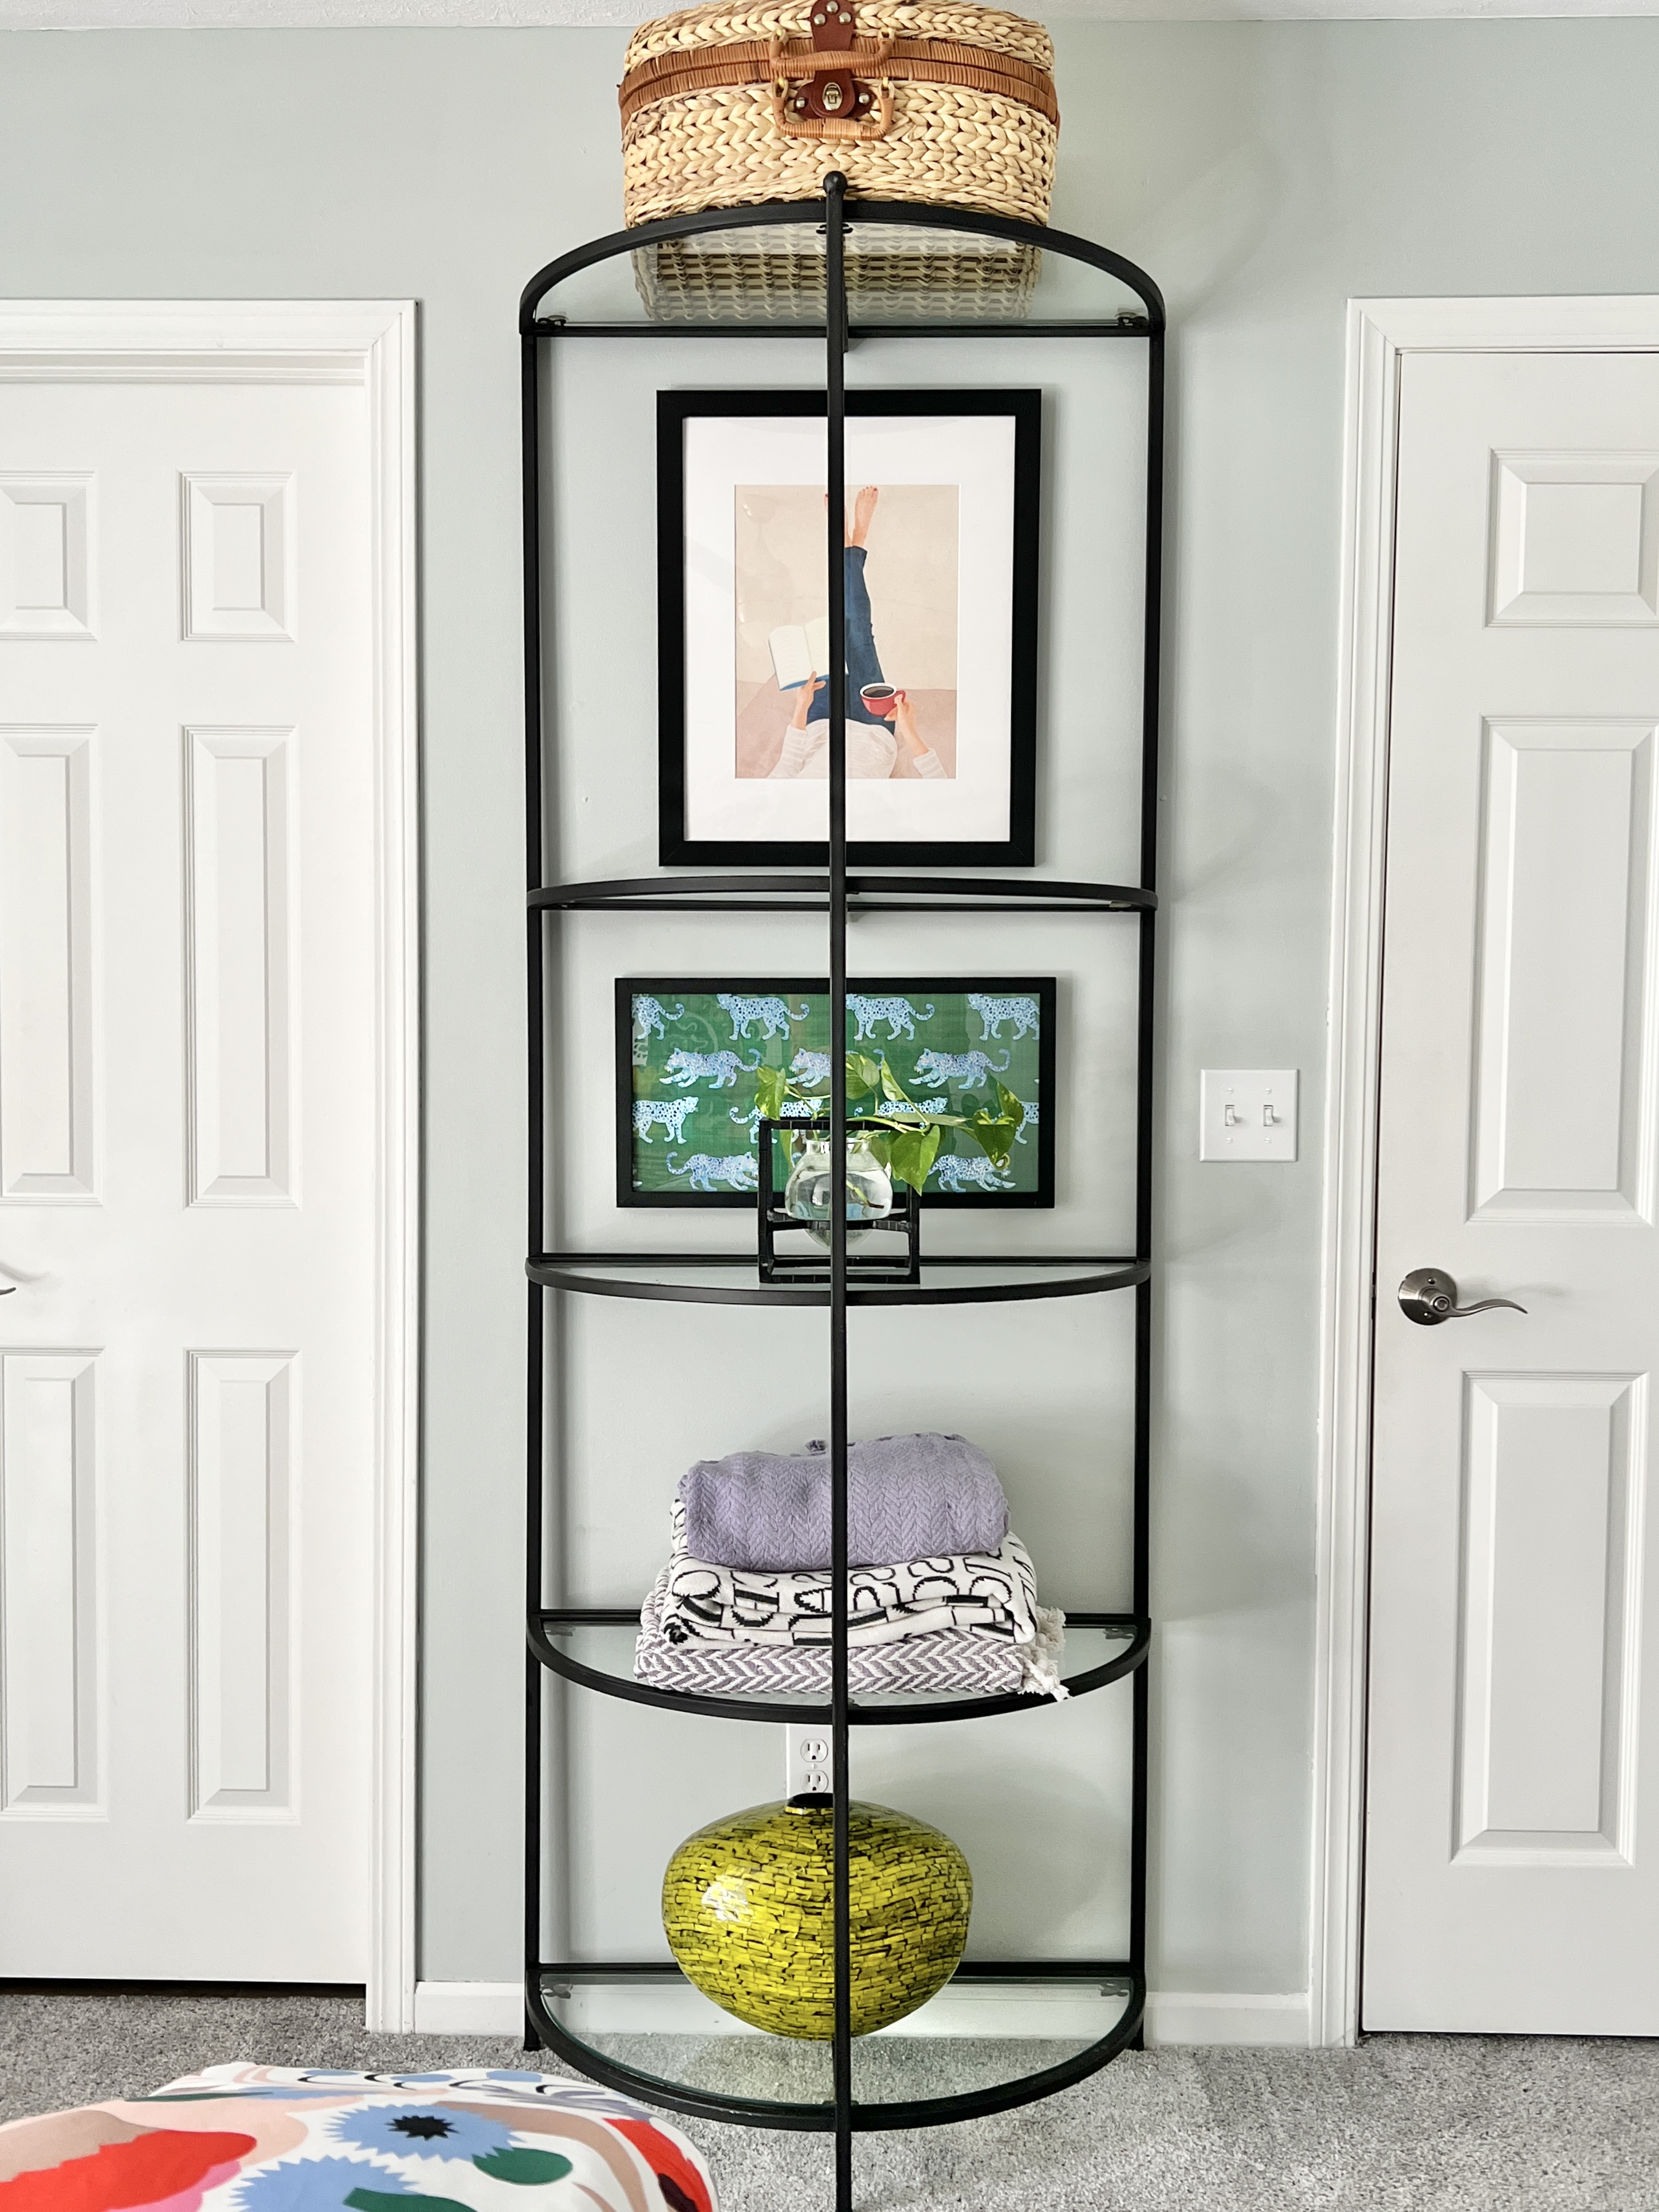 A metal and glass etagere serves as a bookcase to hold more wall art, extra blankets, and give guests storage options in their cozy guest room.